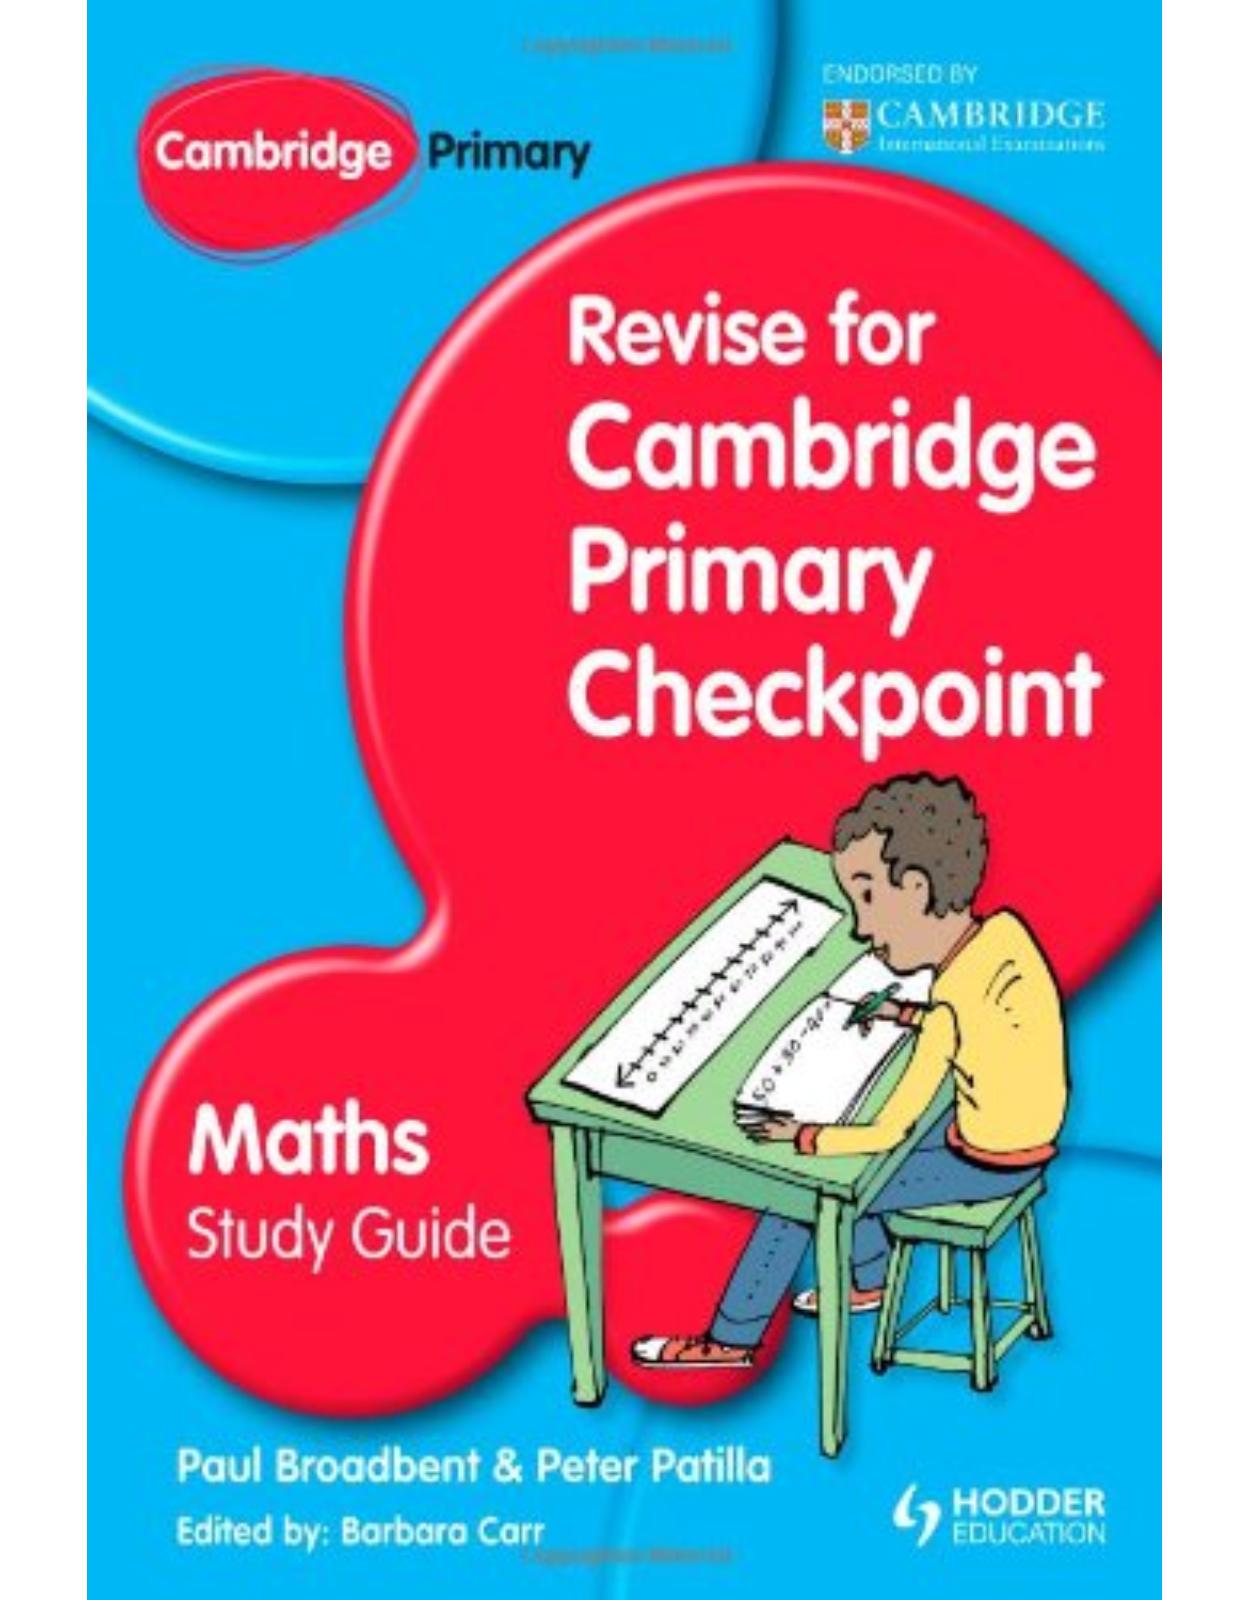 Cambridge Primary Revise for Primary Checkpoint Mathematics Study Guide